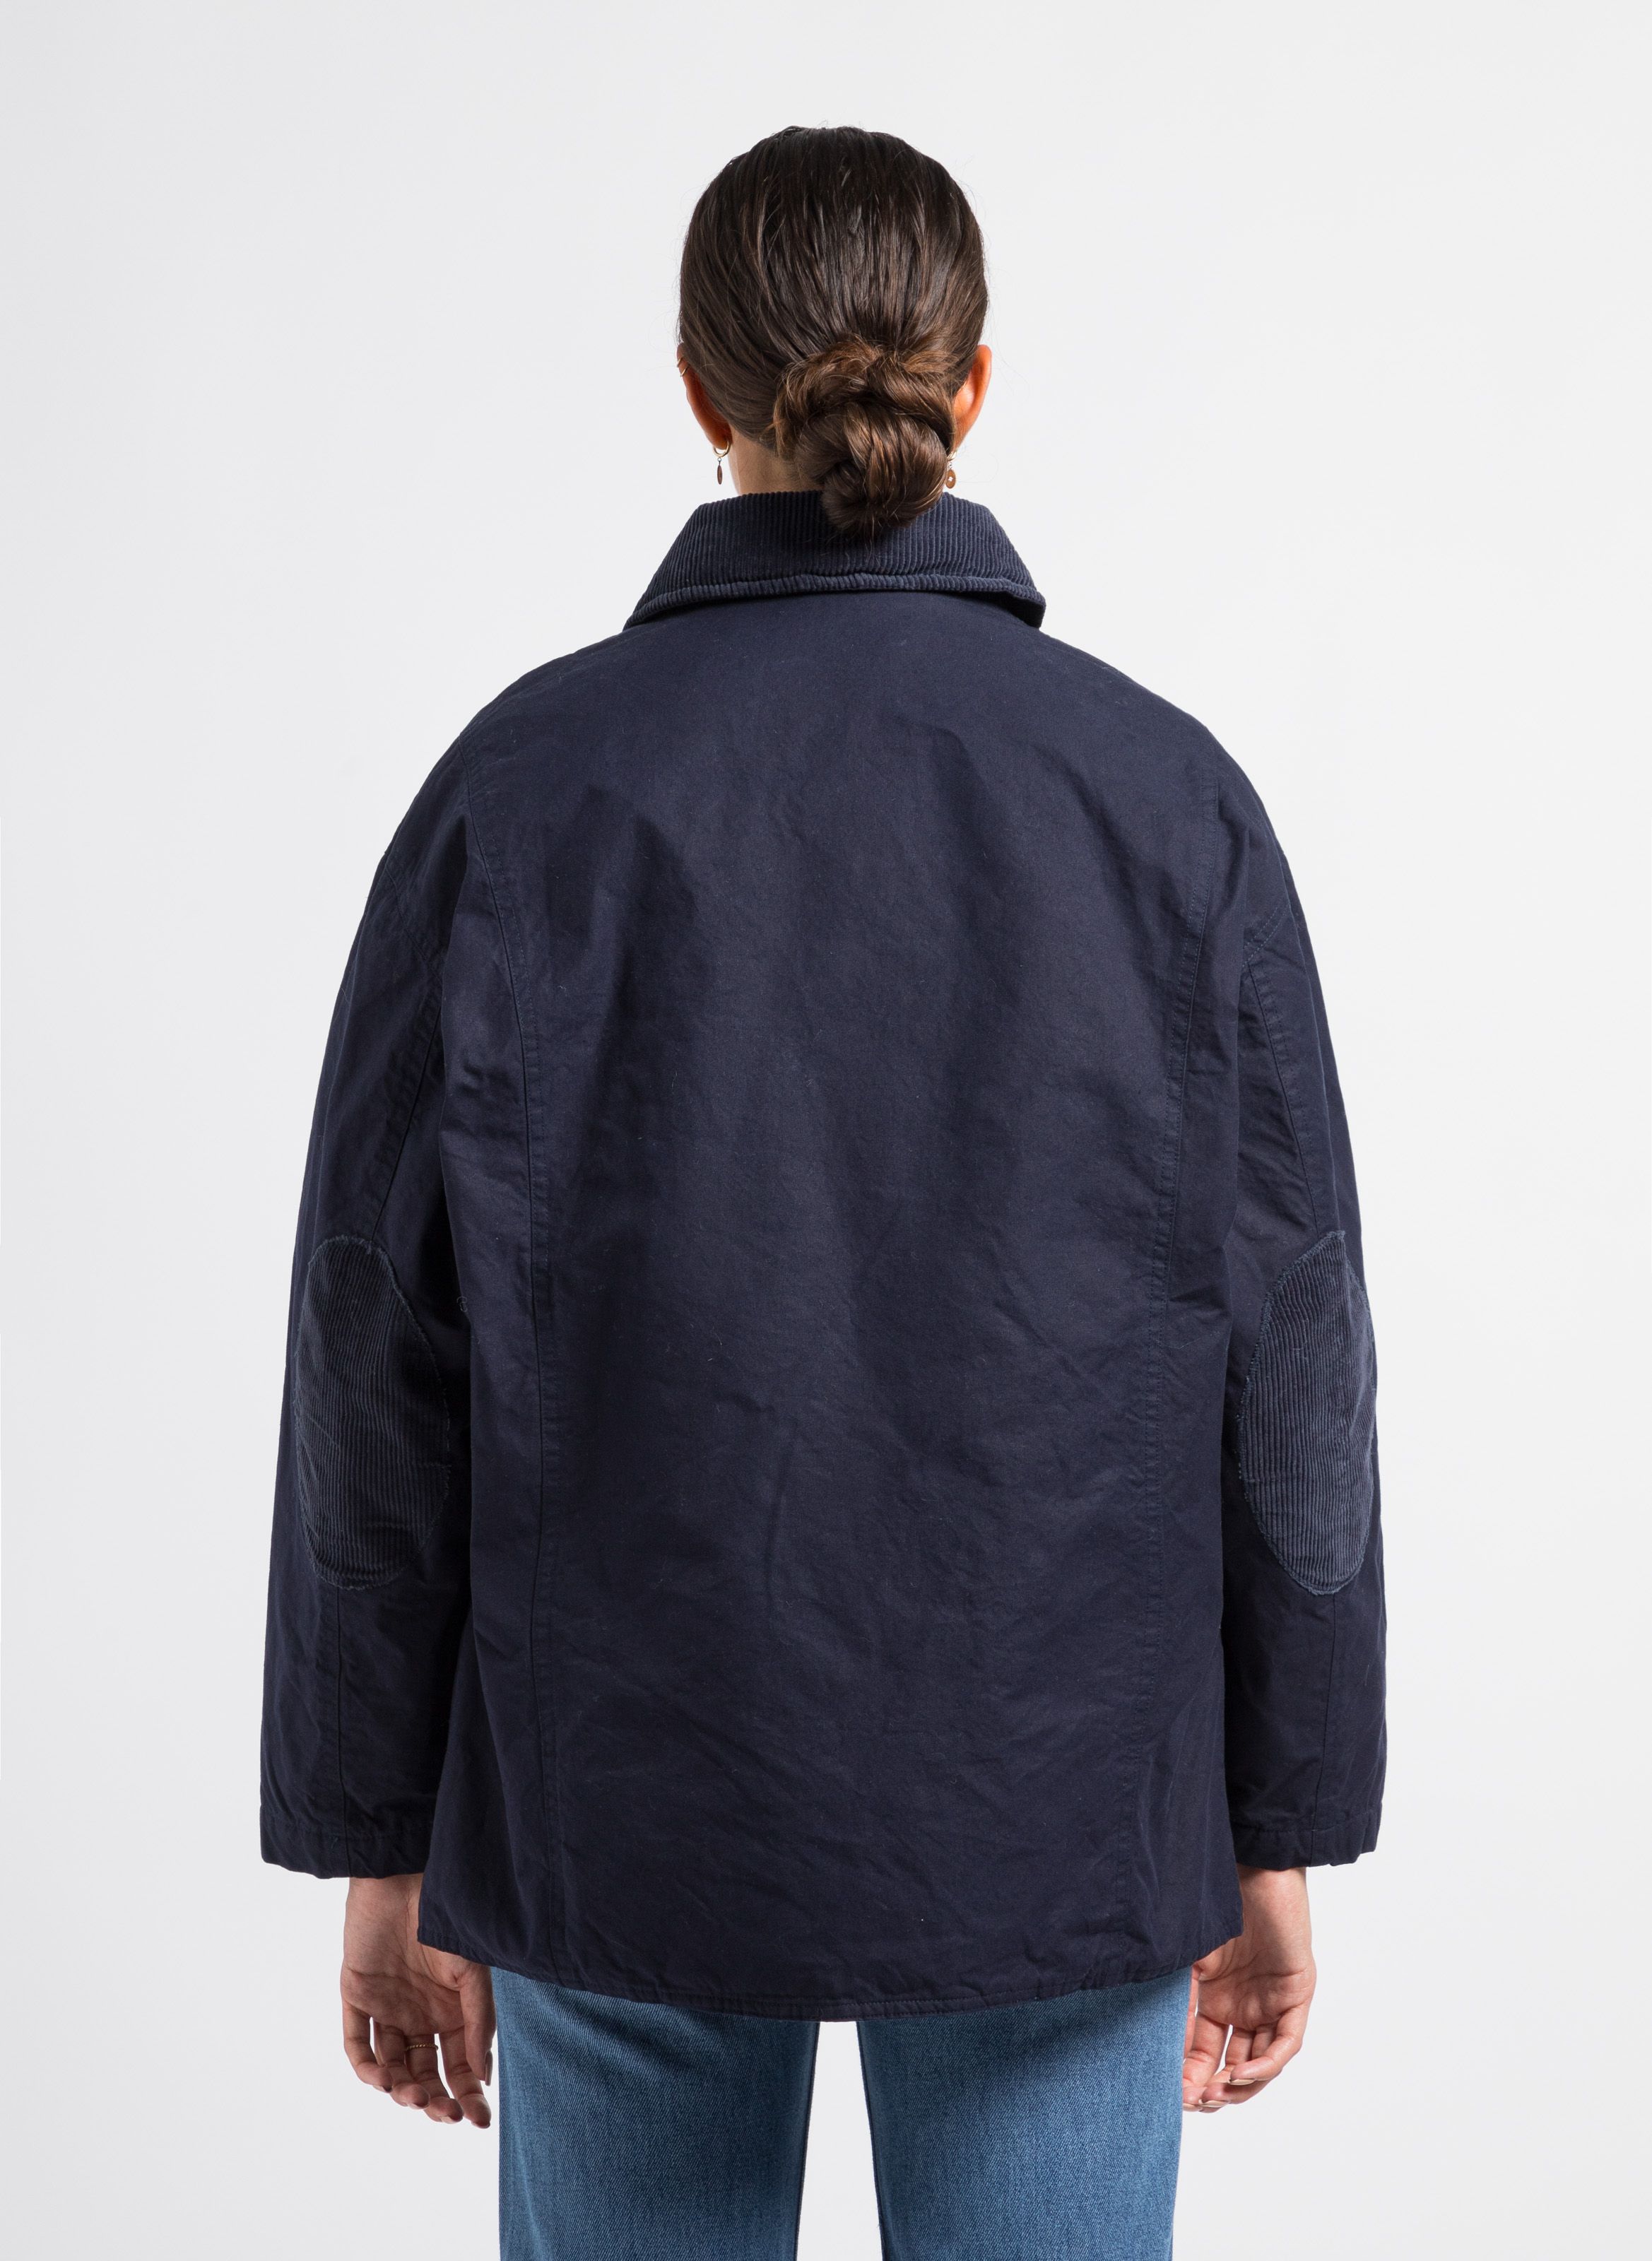 Organic Cotton Jacket With Classic Collar Washed Navy The New